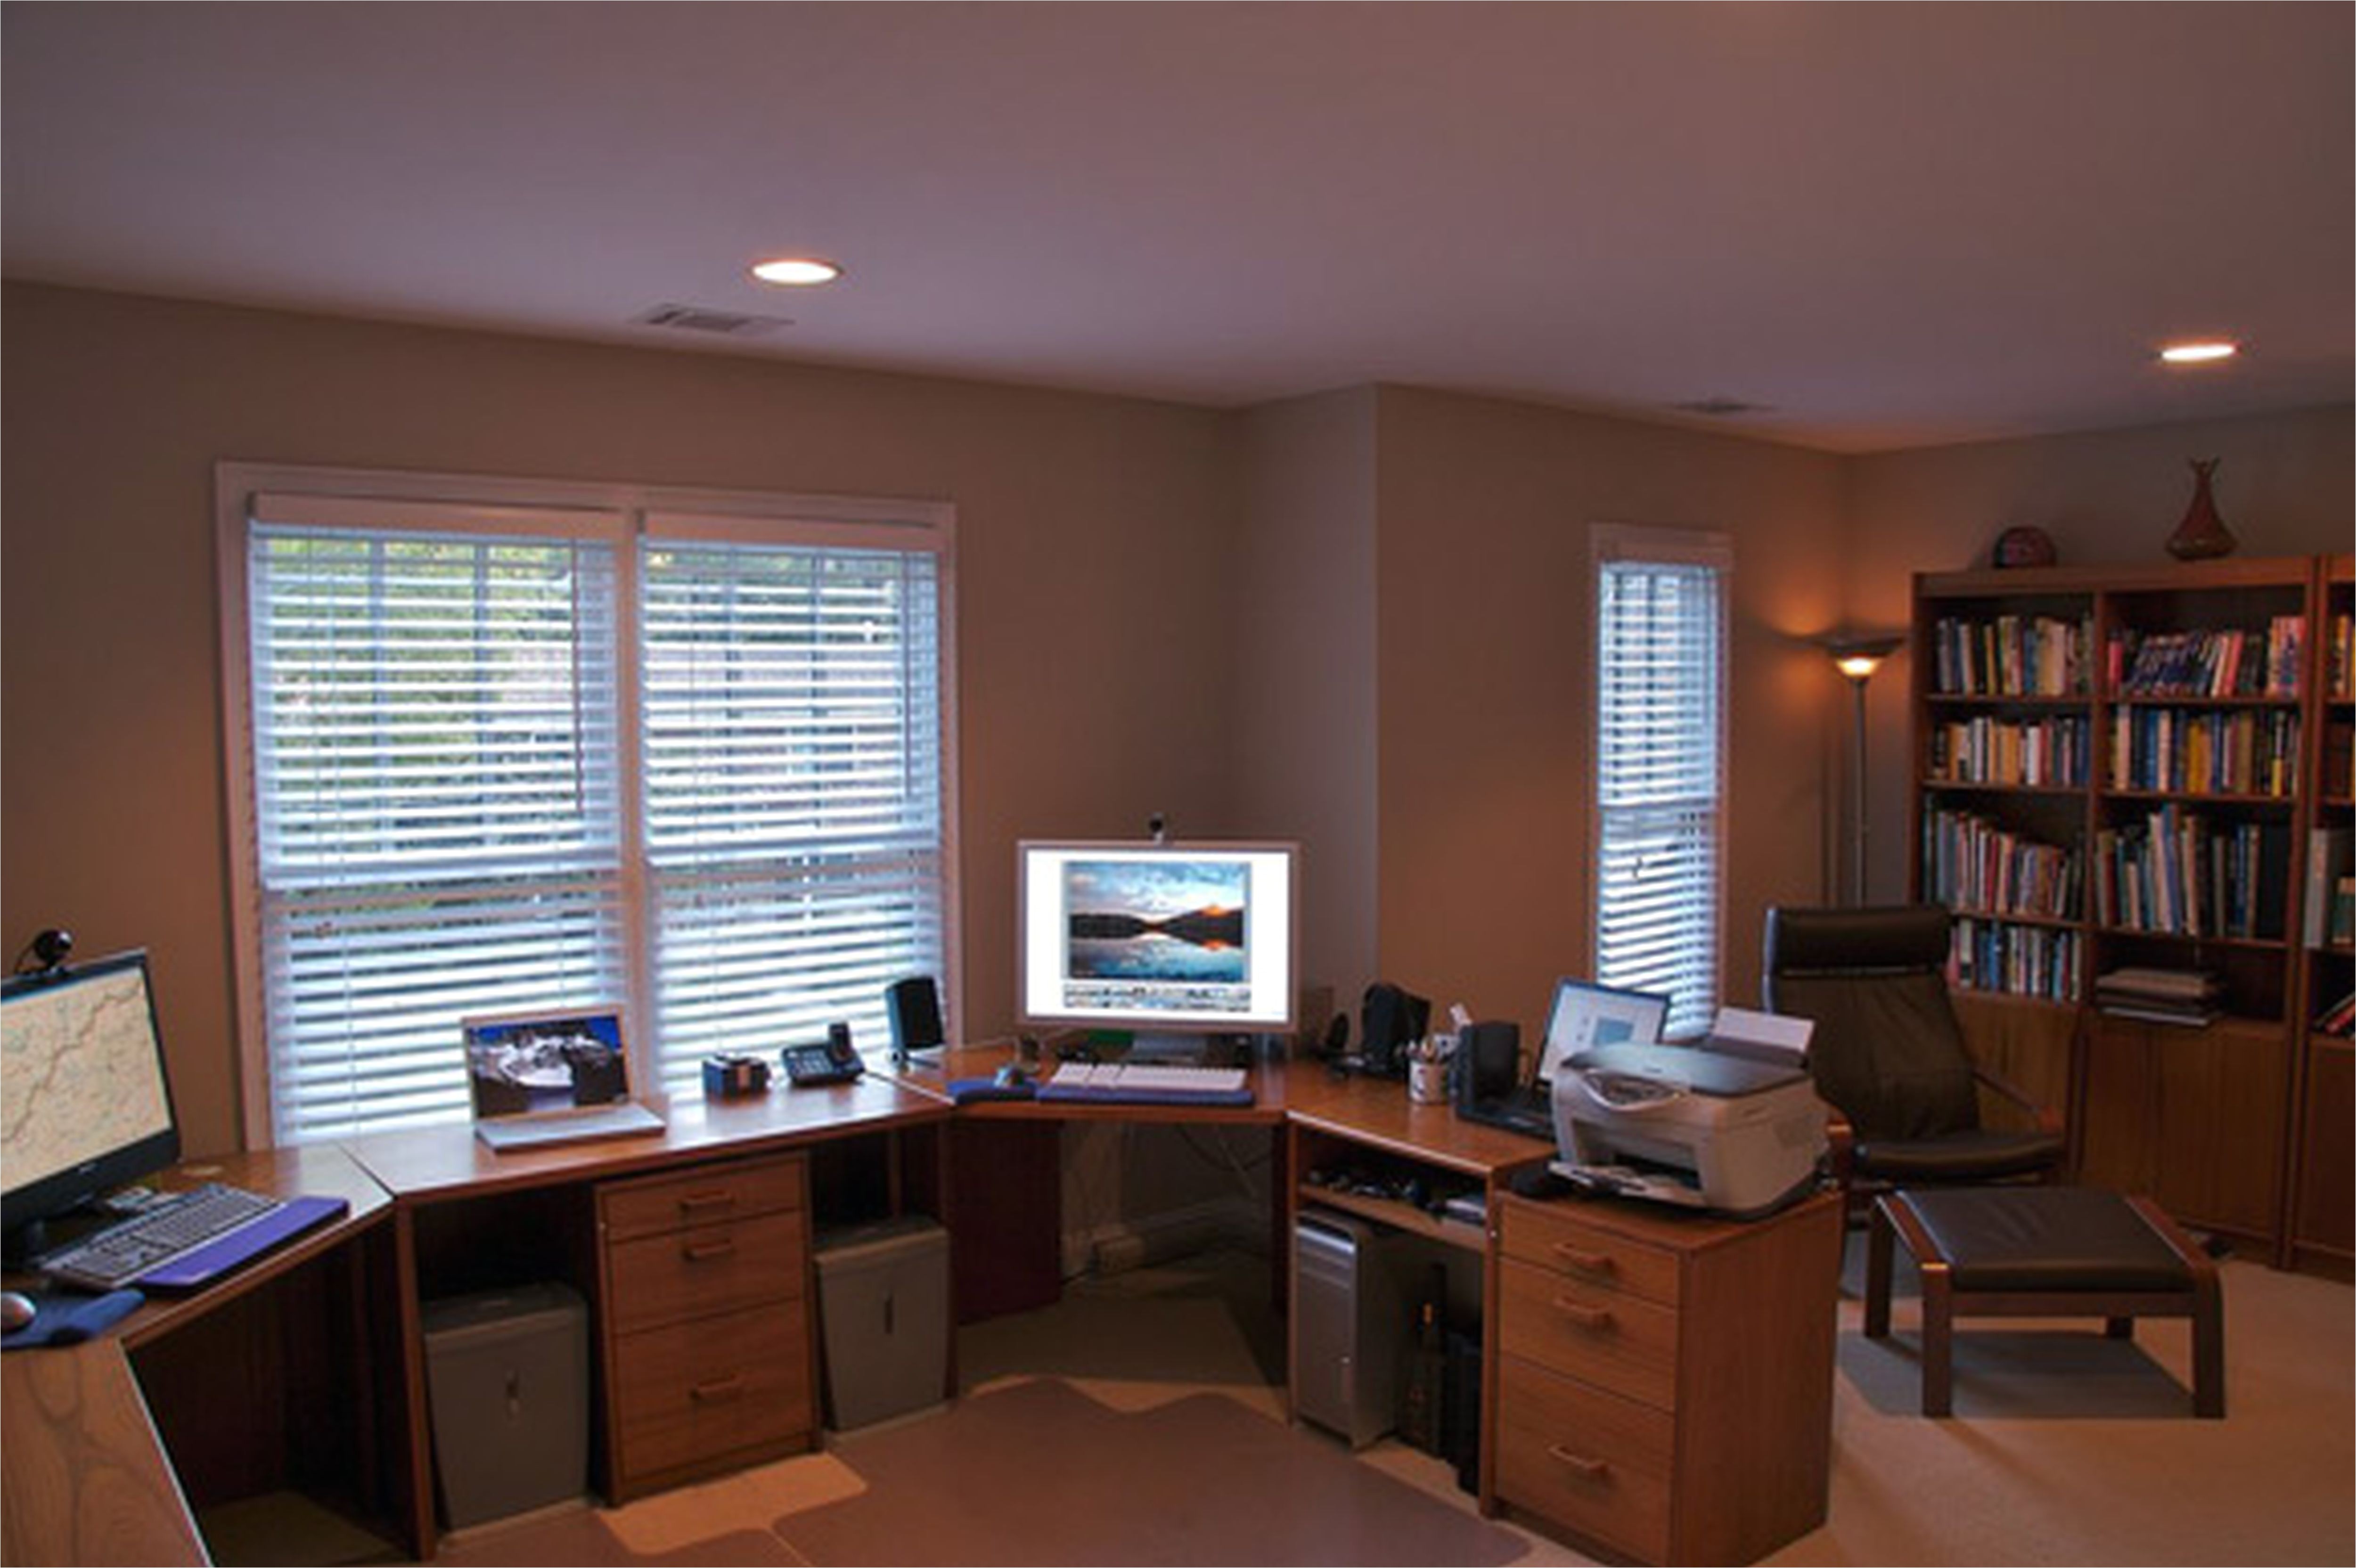 Home Office Plans and Designs Transforming Home Office Design Layout to Be Our World